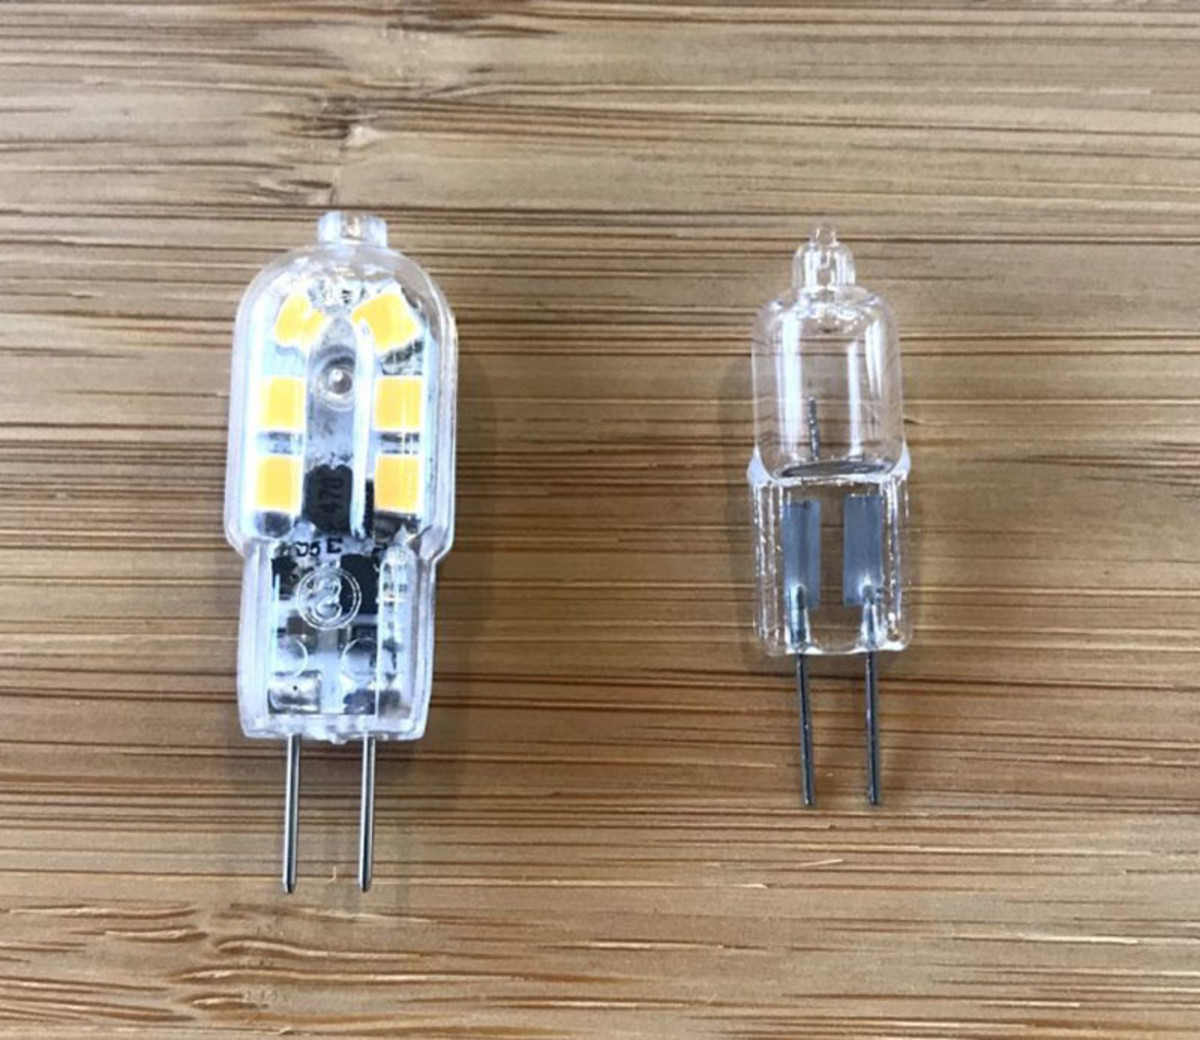 A LED tower bulb replacement for a standard halogen bulb common in many boating light fixtures.